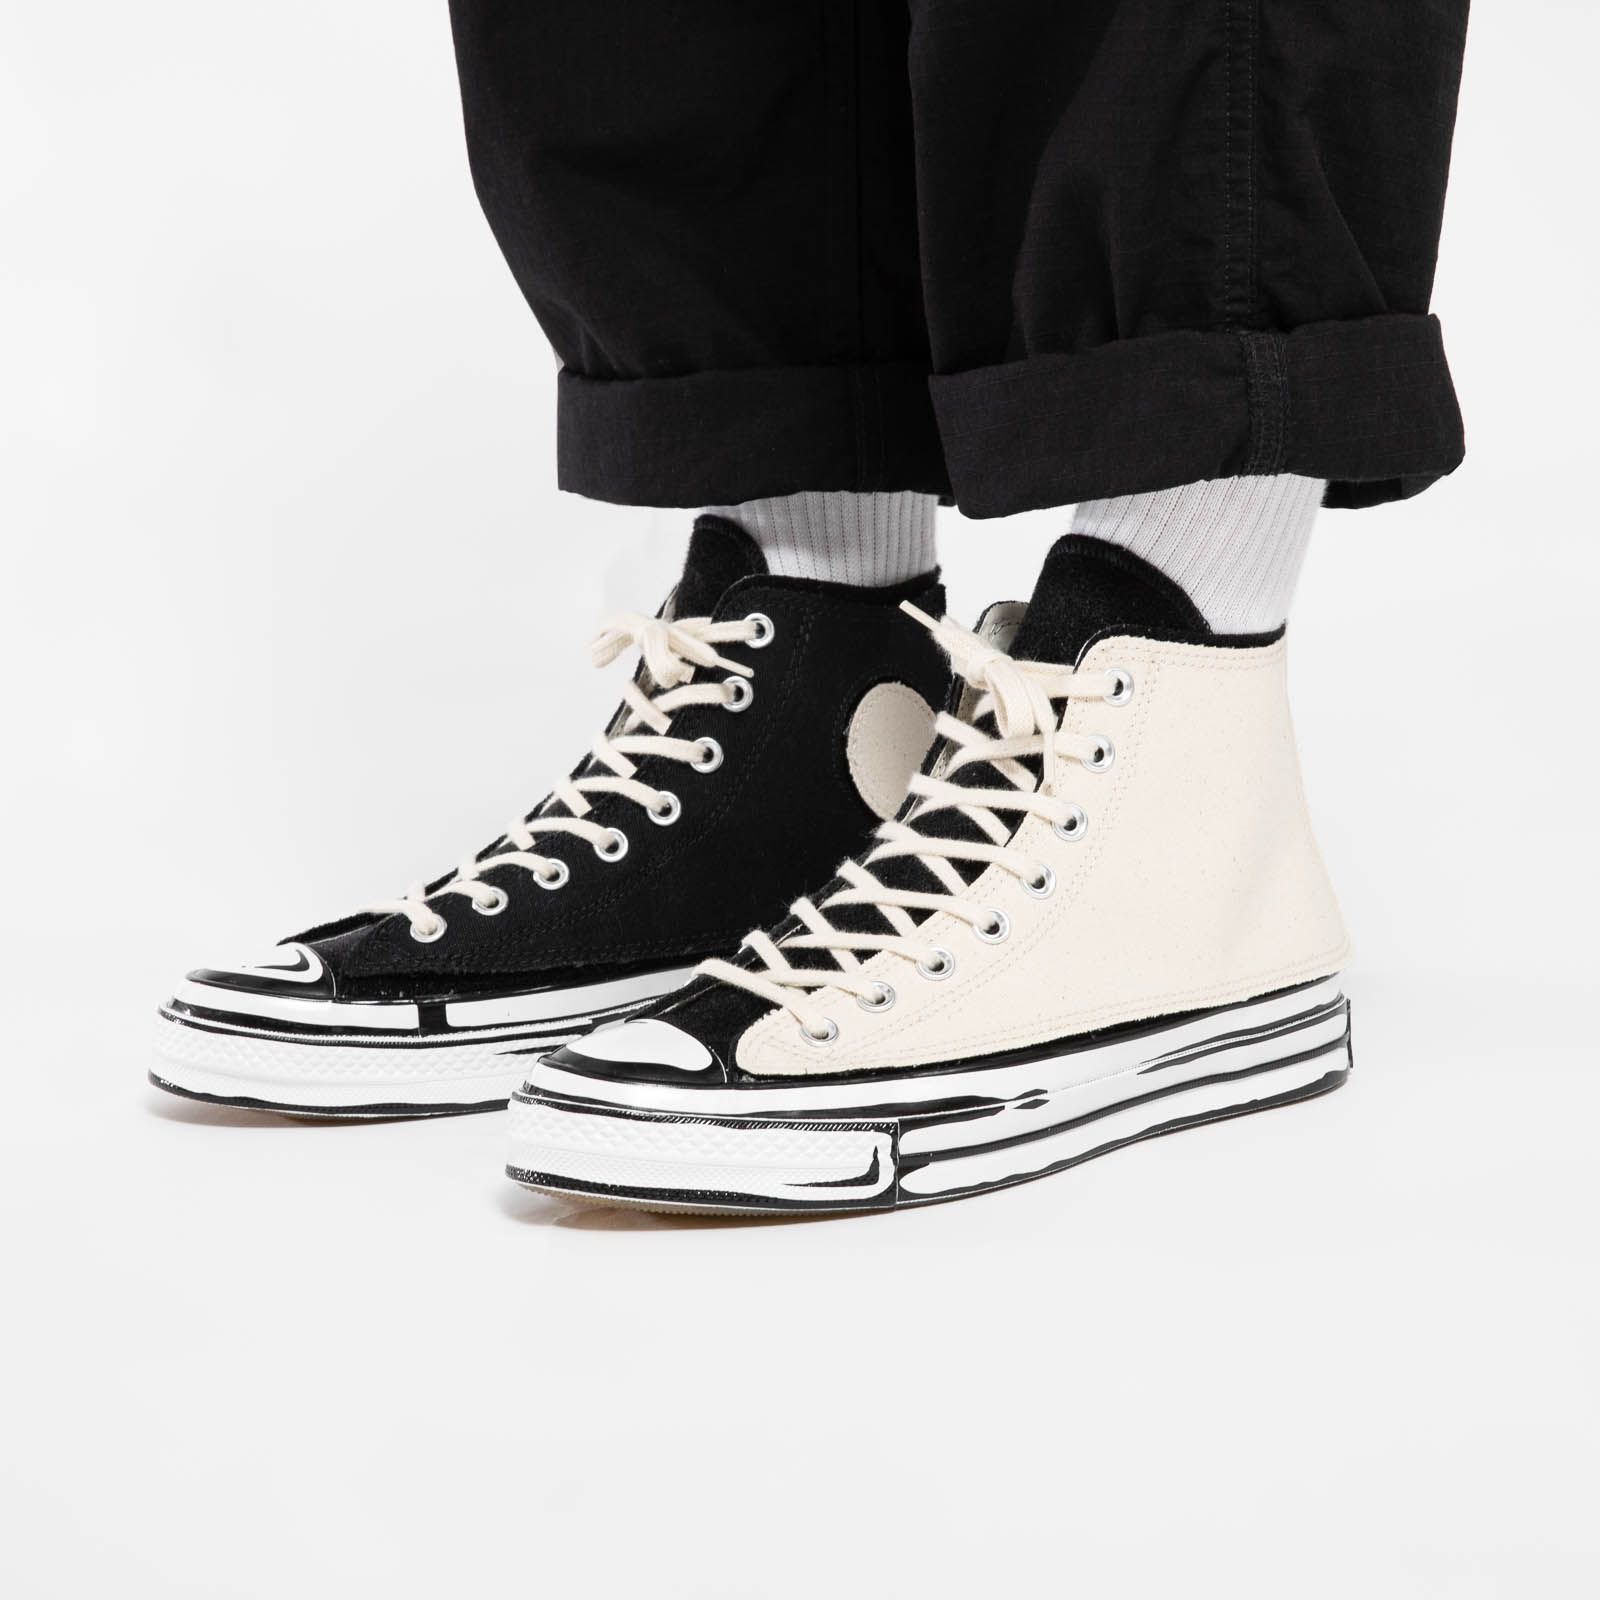 Titolo on X: "ONLINE NOW 🔥 Joshua Vides x Converse Chuck 70s Take Your  Chance ➡️ https://t.co/xR4Wn7i2da US 4 (36.5) - US 12 (46.5)⁠ style codes  🔎 166558C and 166559C⁠ #converse #joshuavides #